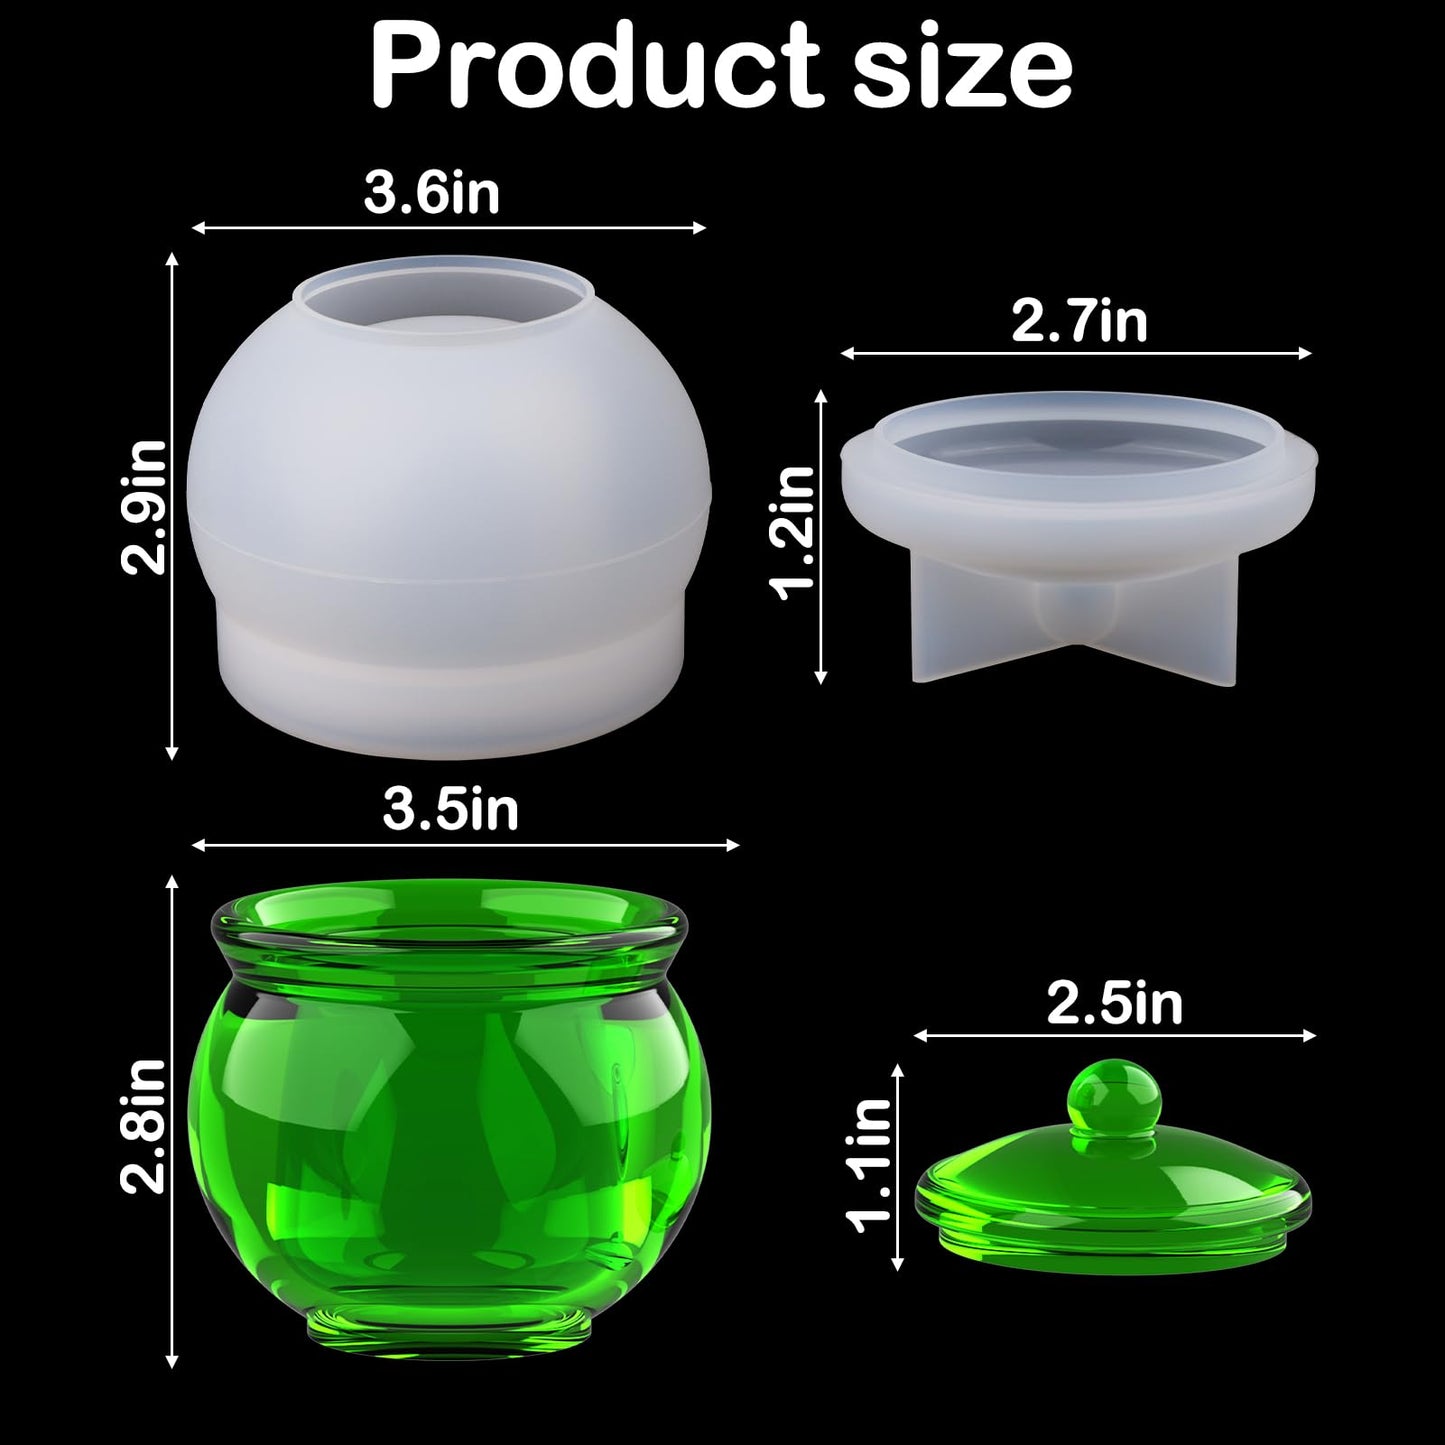 Juome Jar Resin Molds Silicone, Large Jars Silicone Molds with Lid for Epoxy Resin Casting, Resin Mold for DIY Jewelry Storage Box, Candy Container,